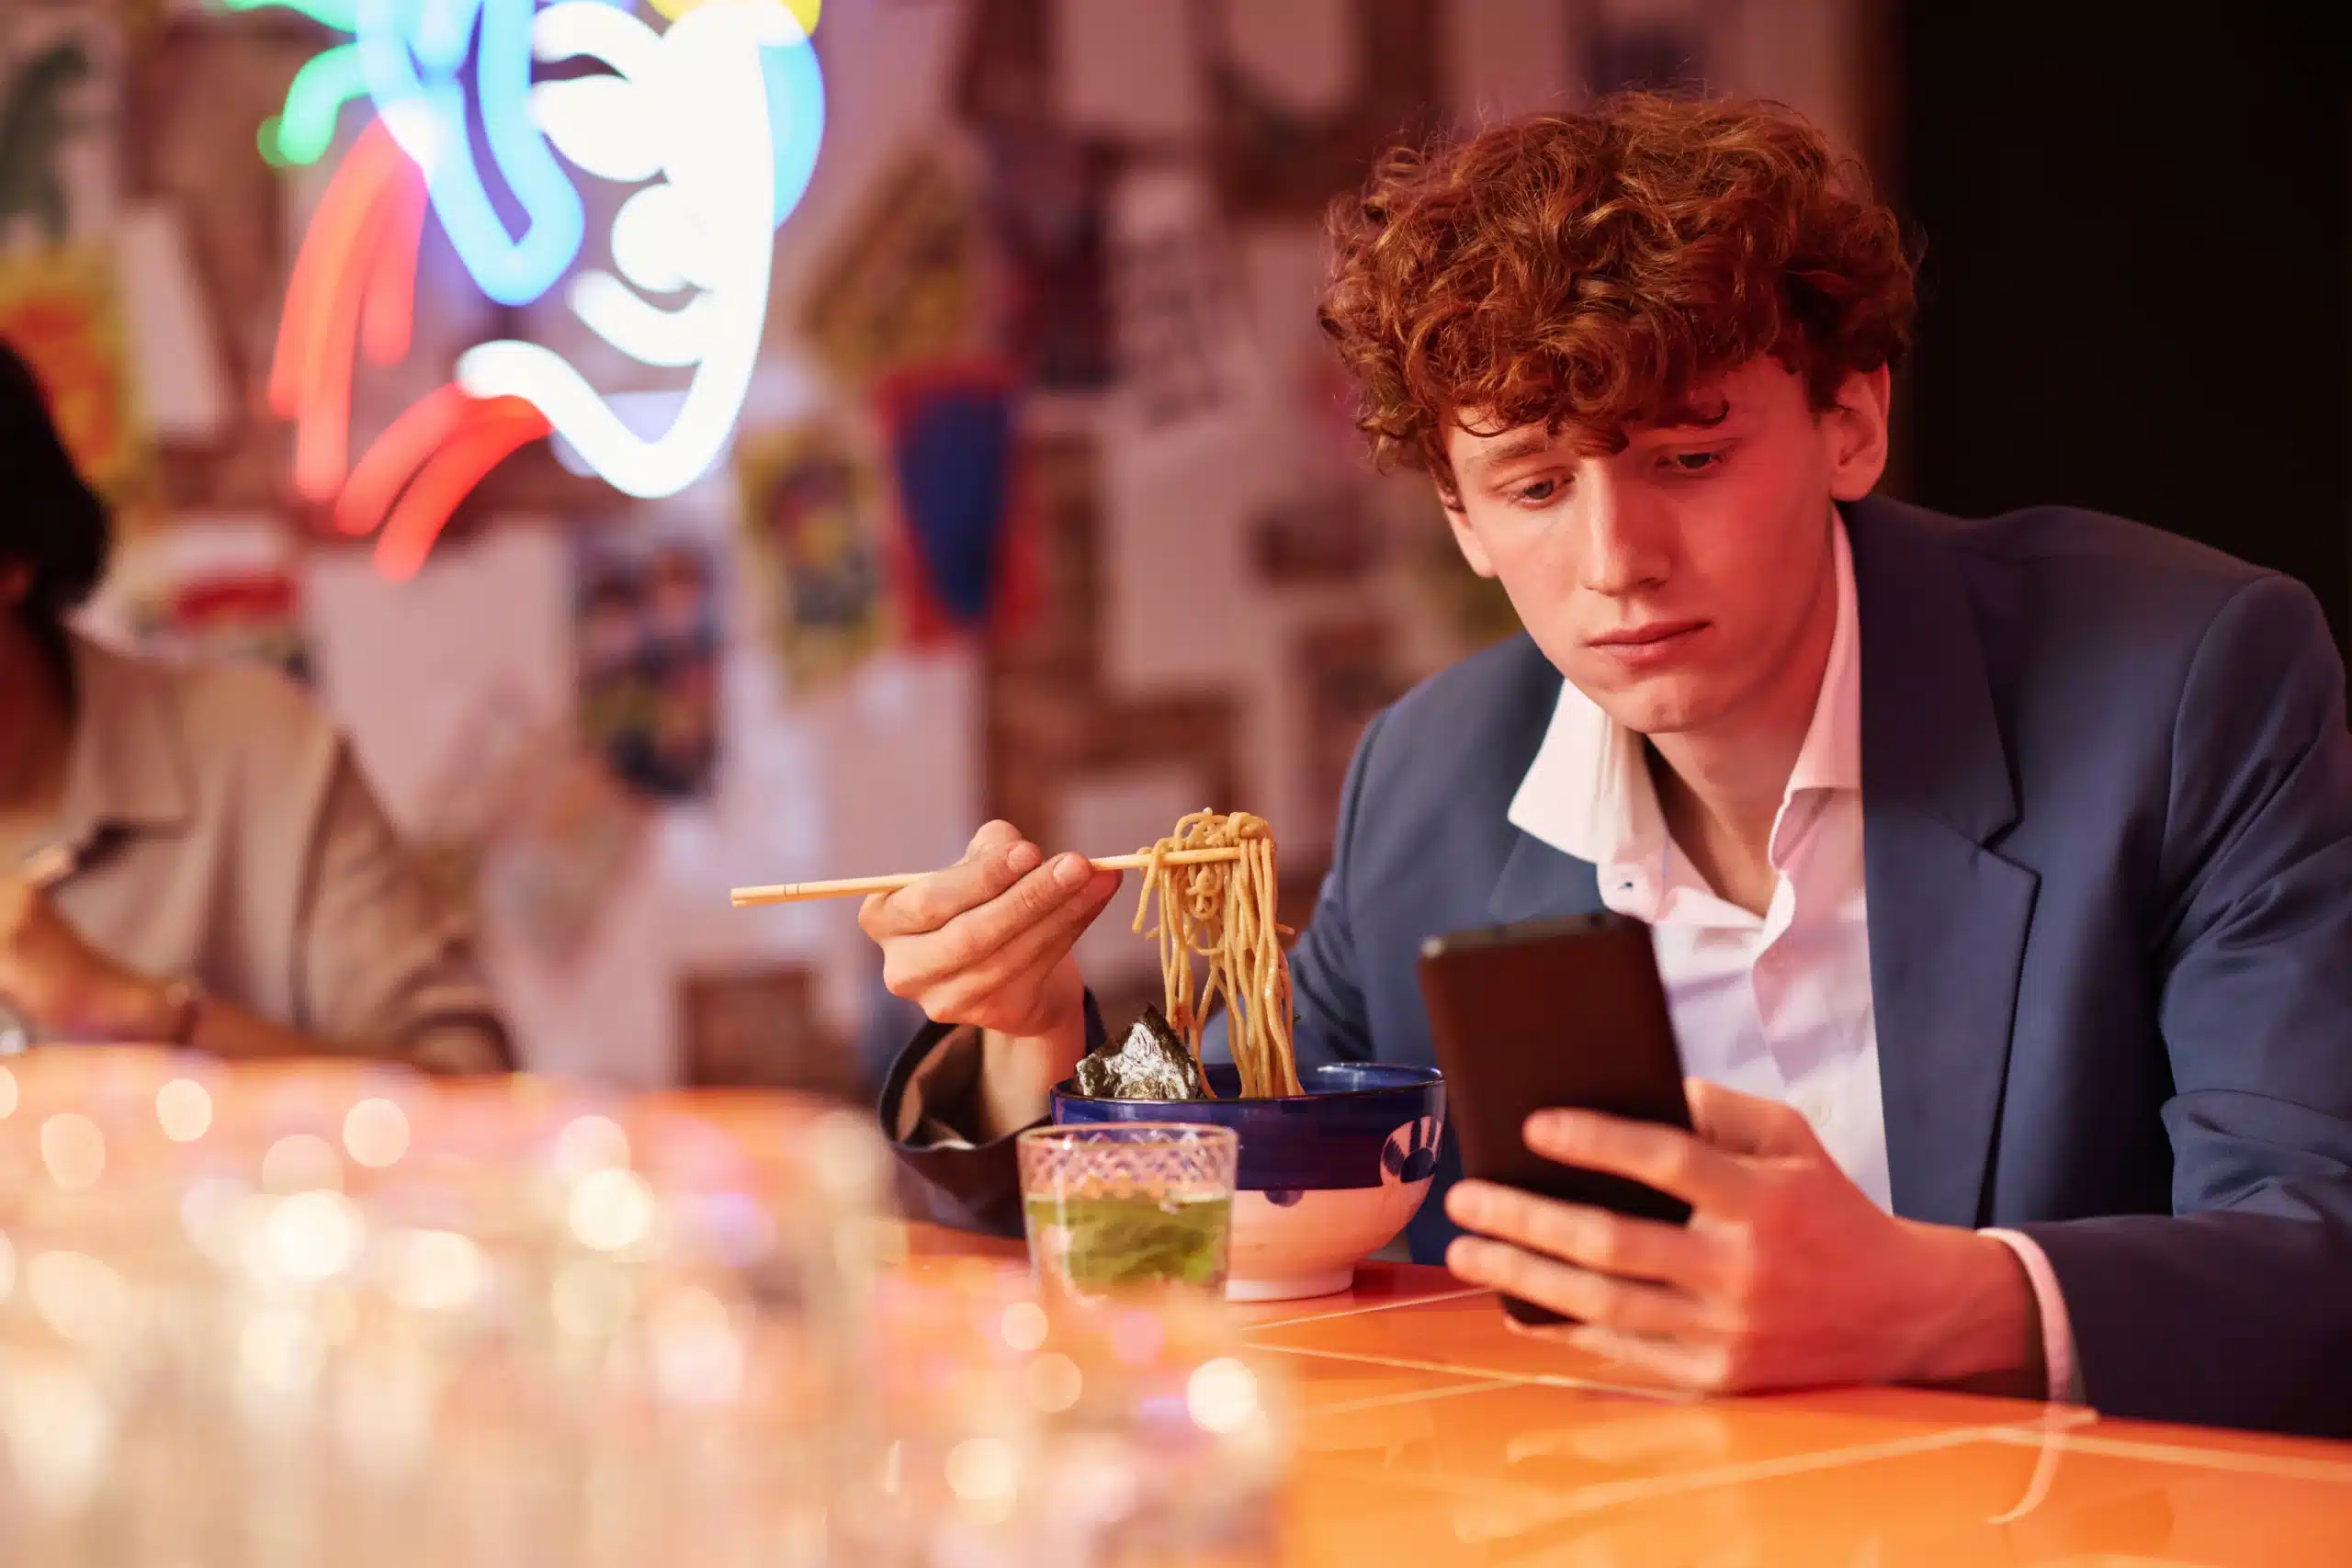 A man eating Asian noodles from a bowl while looking at his phone